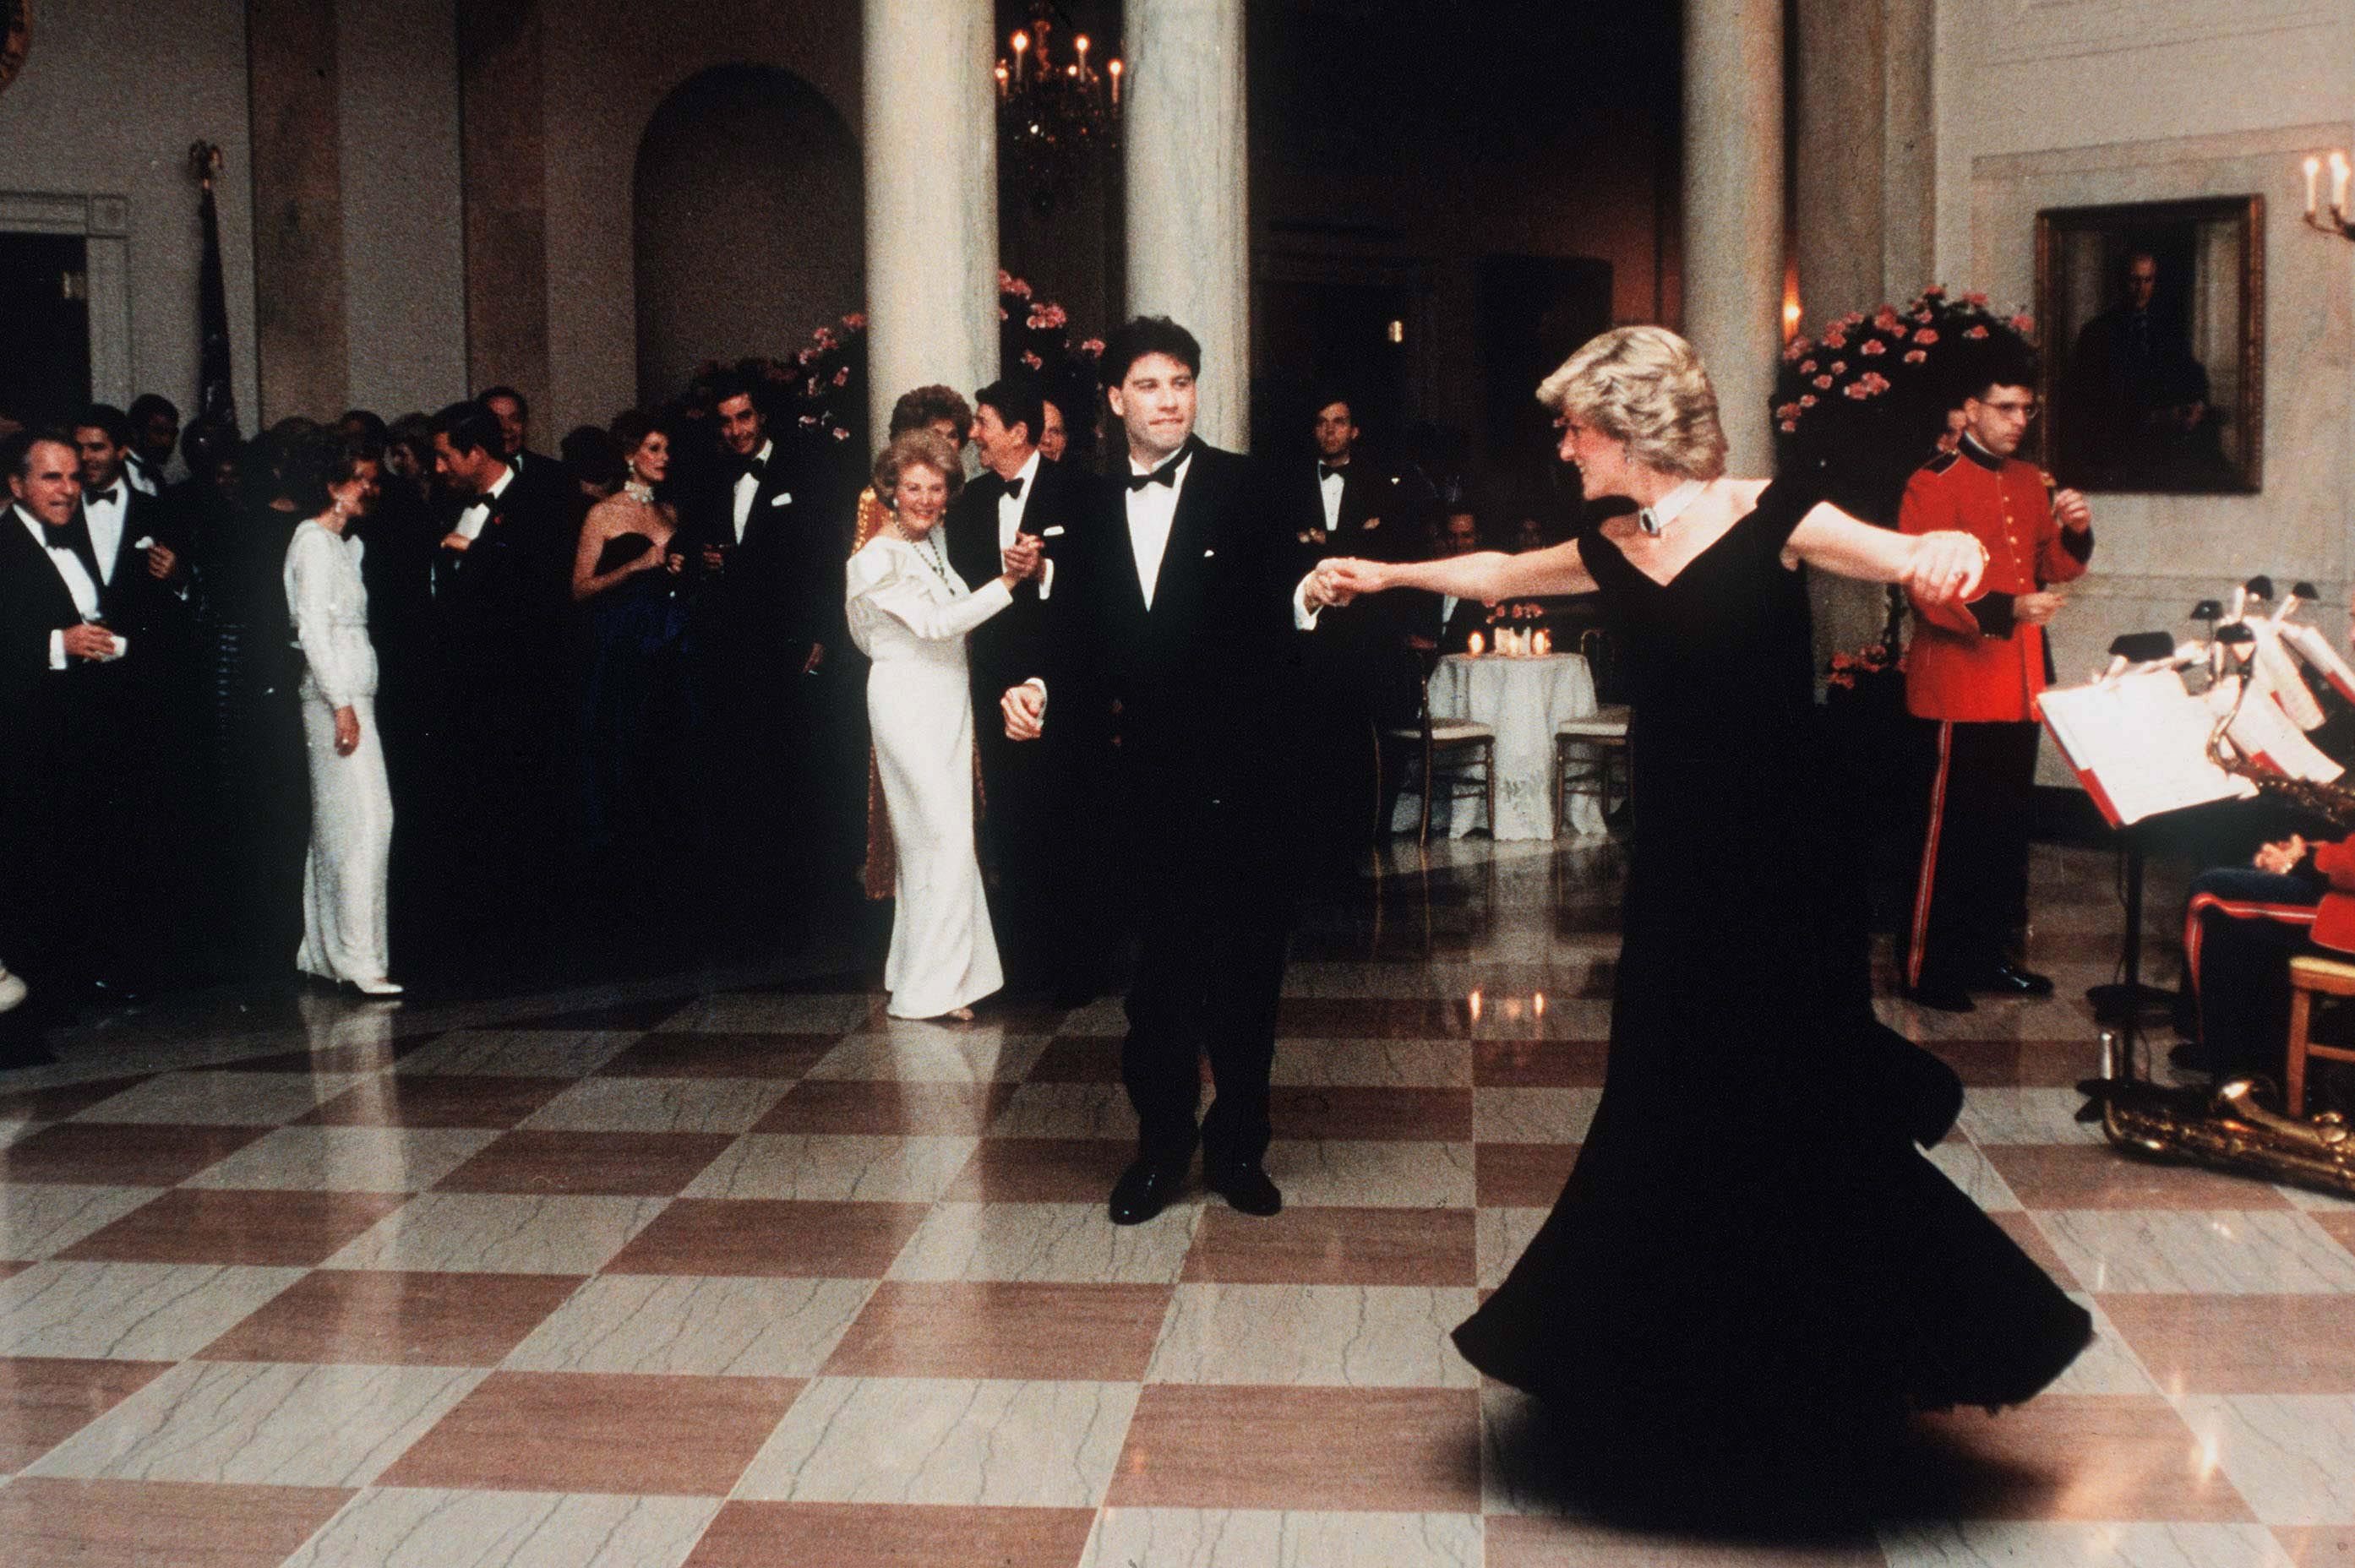 Diana, Princess Of Wales dances with John Travolta at the White House, USA on November 9, 1985 | Photo: Getty Images